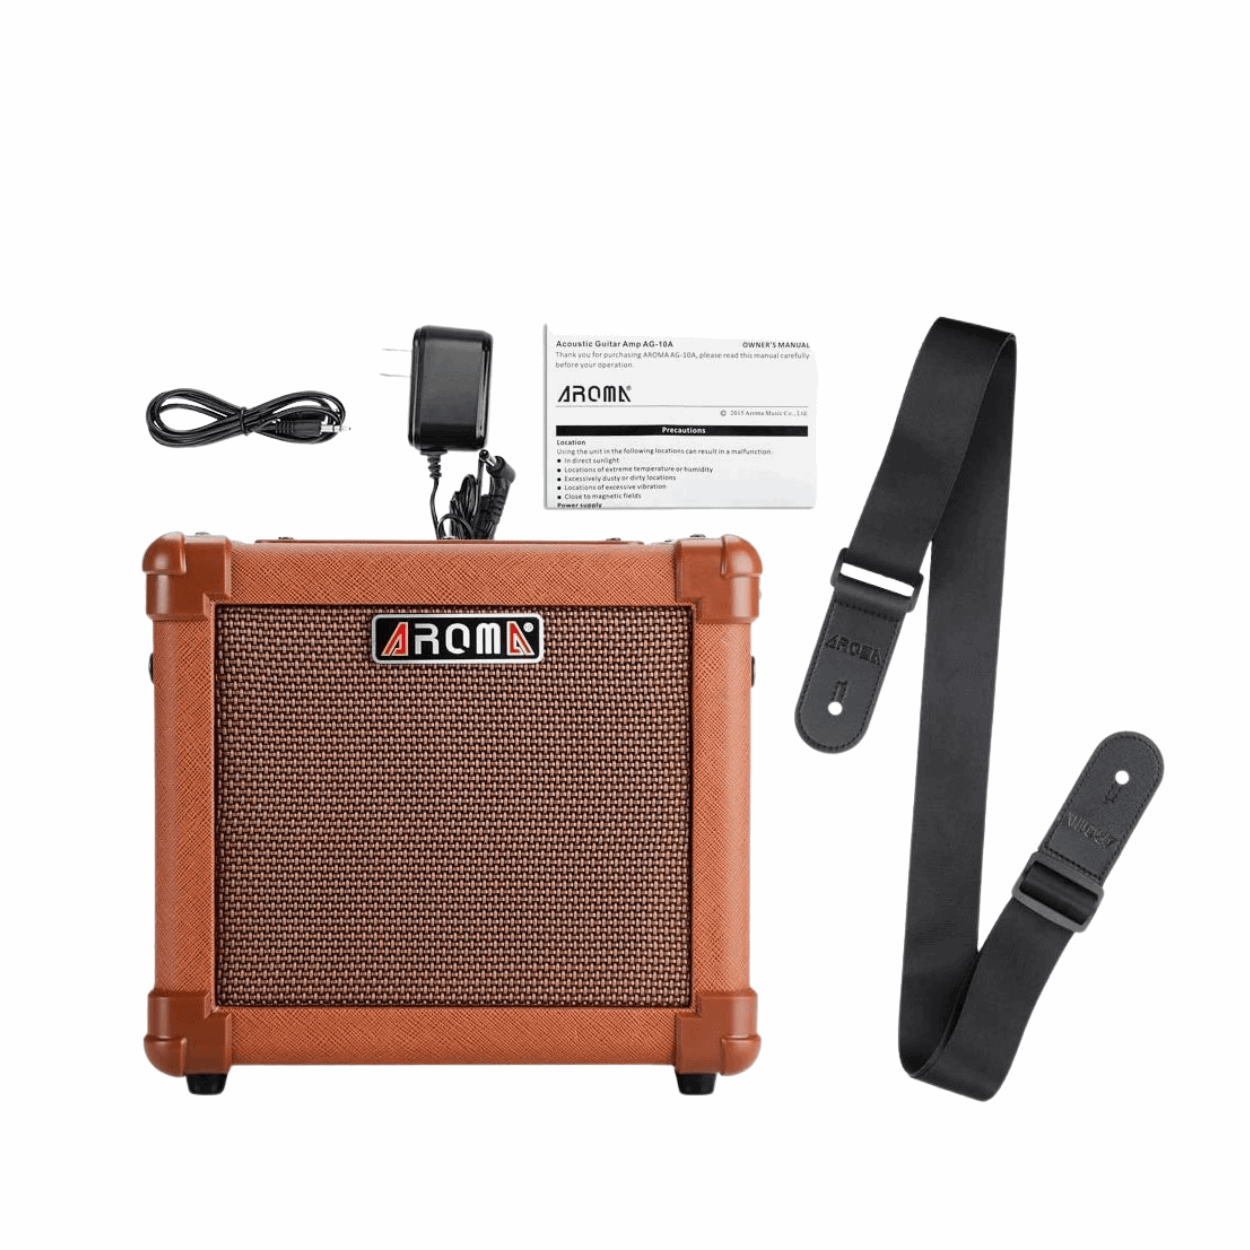 Aroma AG10A Portable Compact Acoustic Guitar Amp 10 Watts With Shoulder Strap | AROMA , Zoso Music